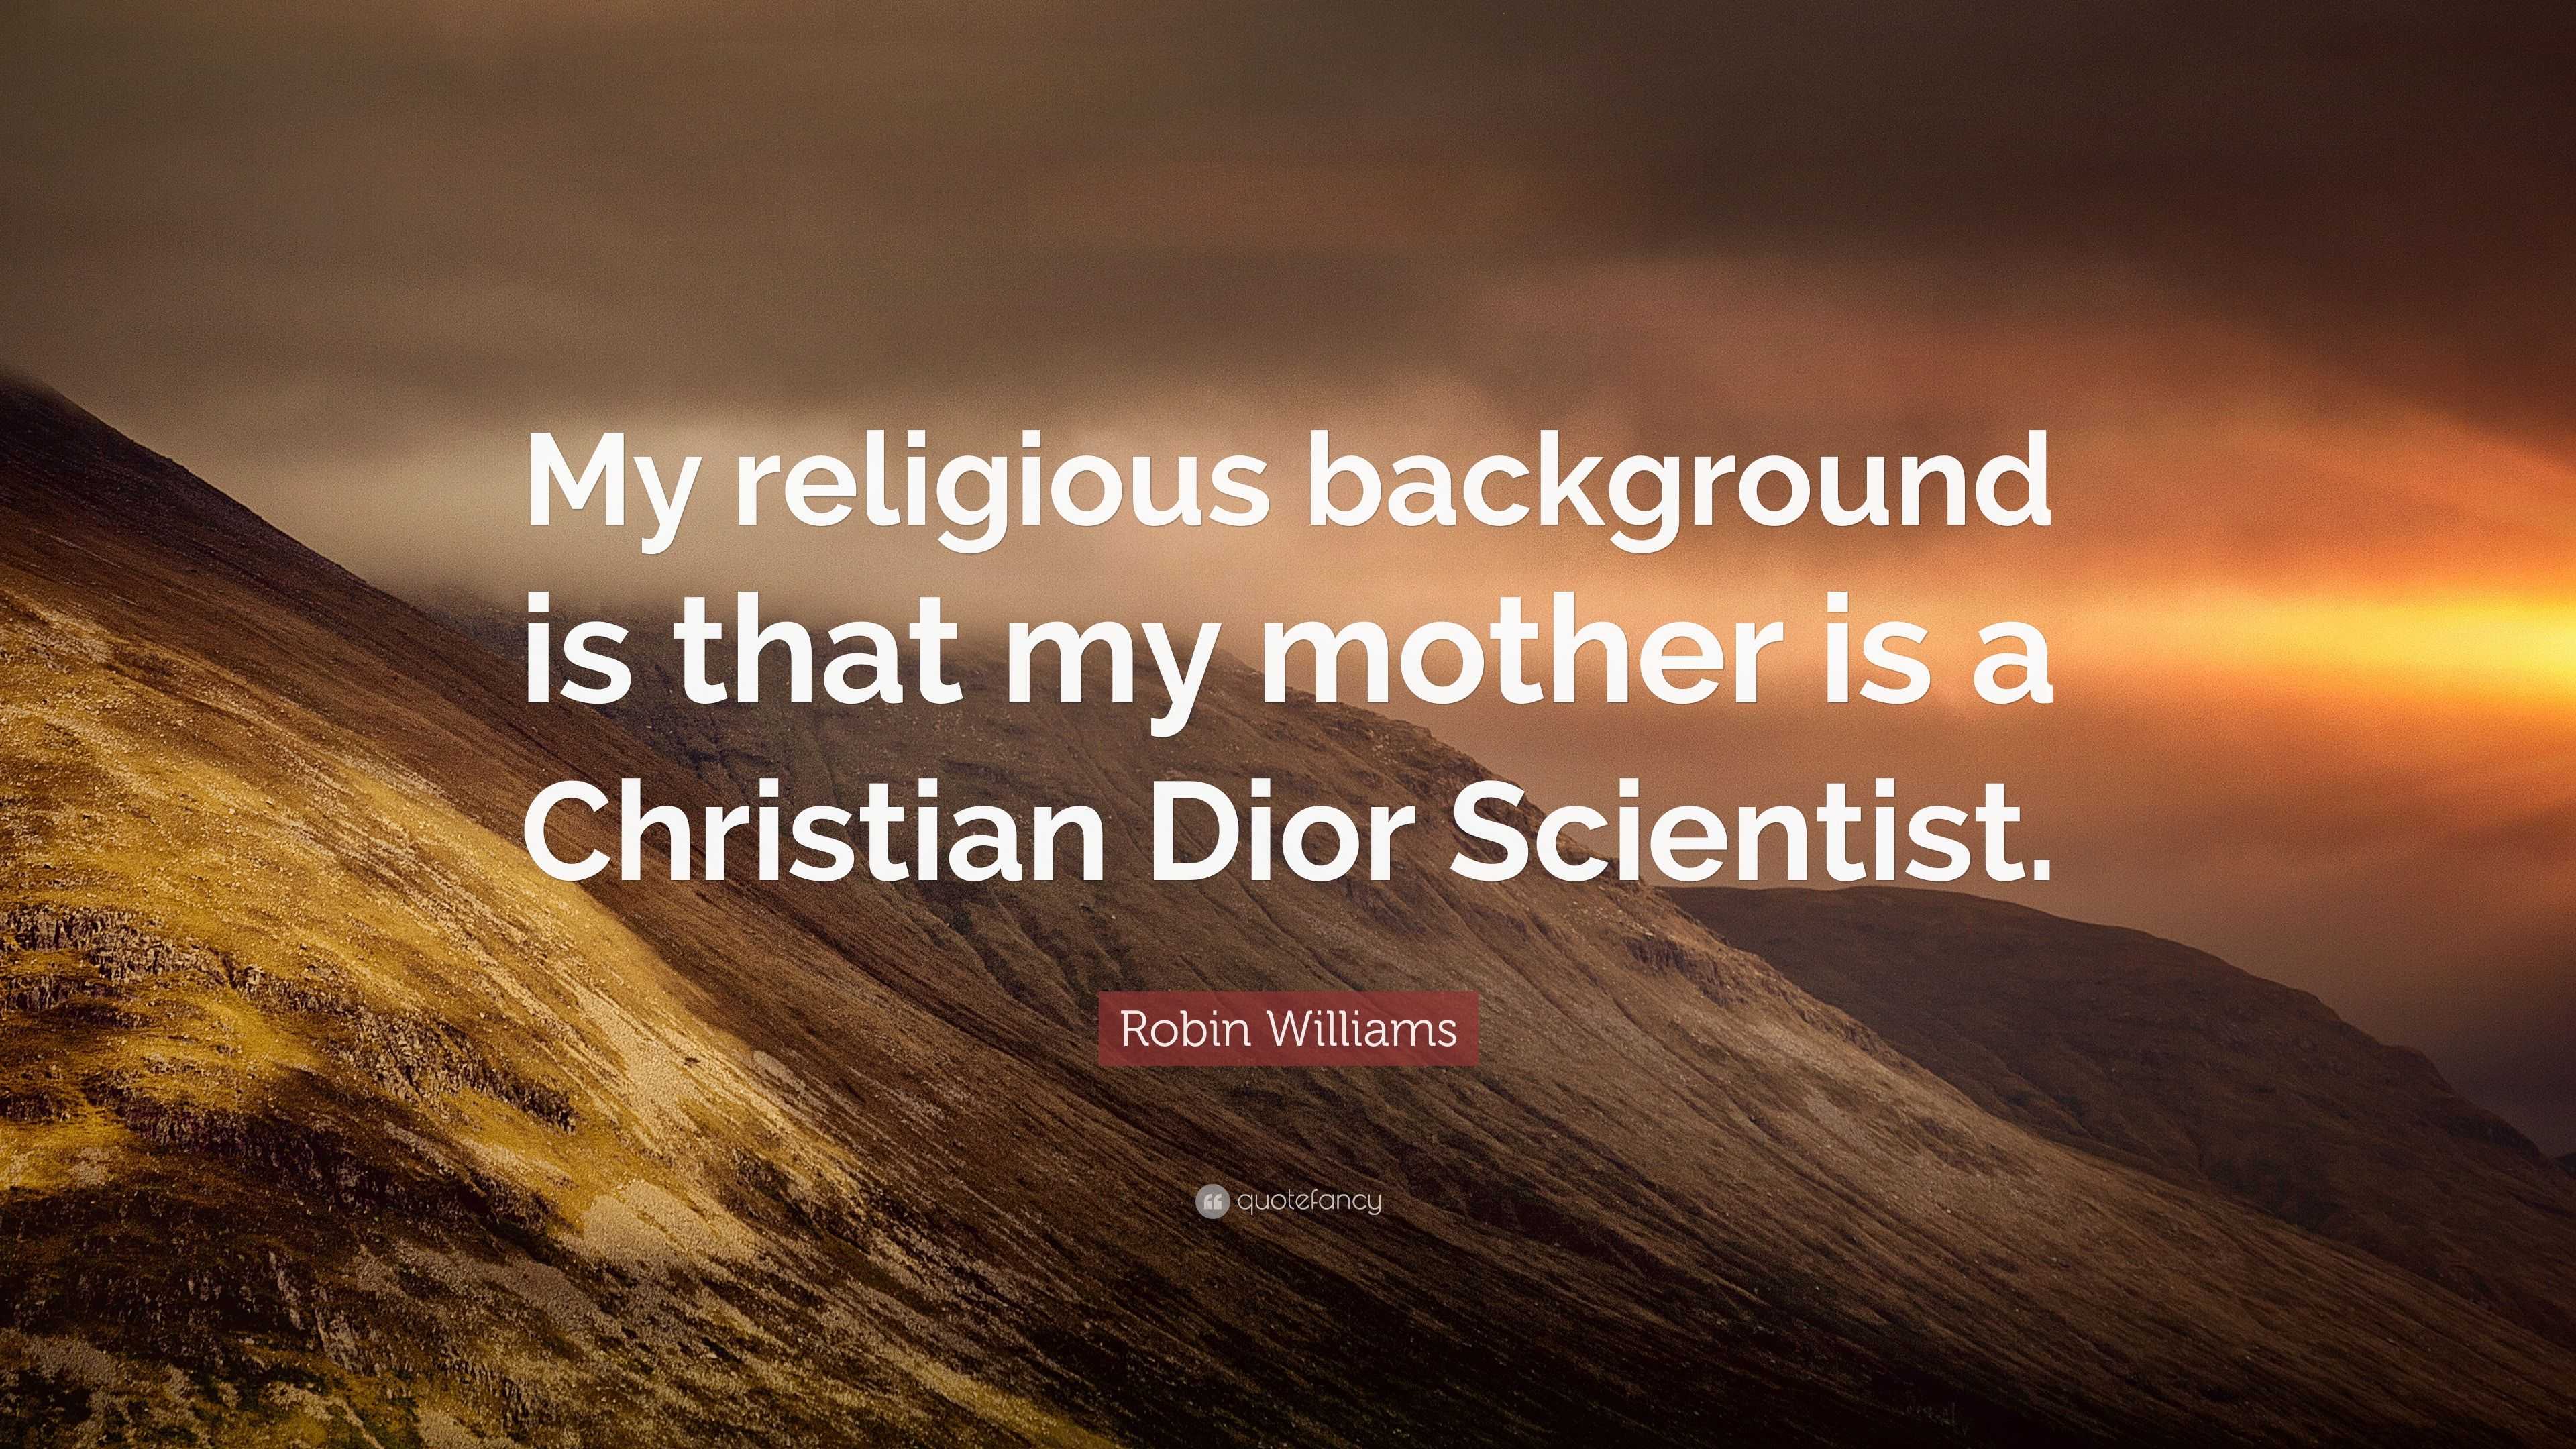 Robin Williams Quote: “My religious background is that my mother is a ...